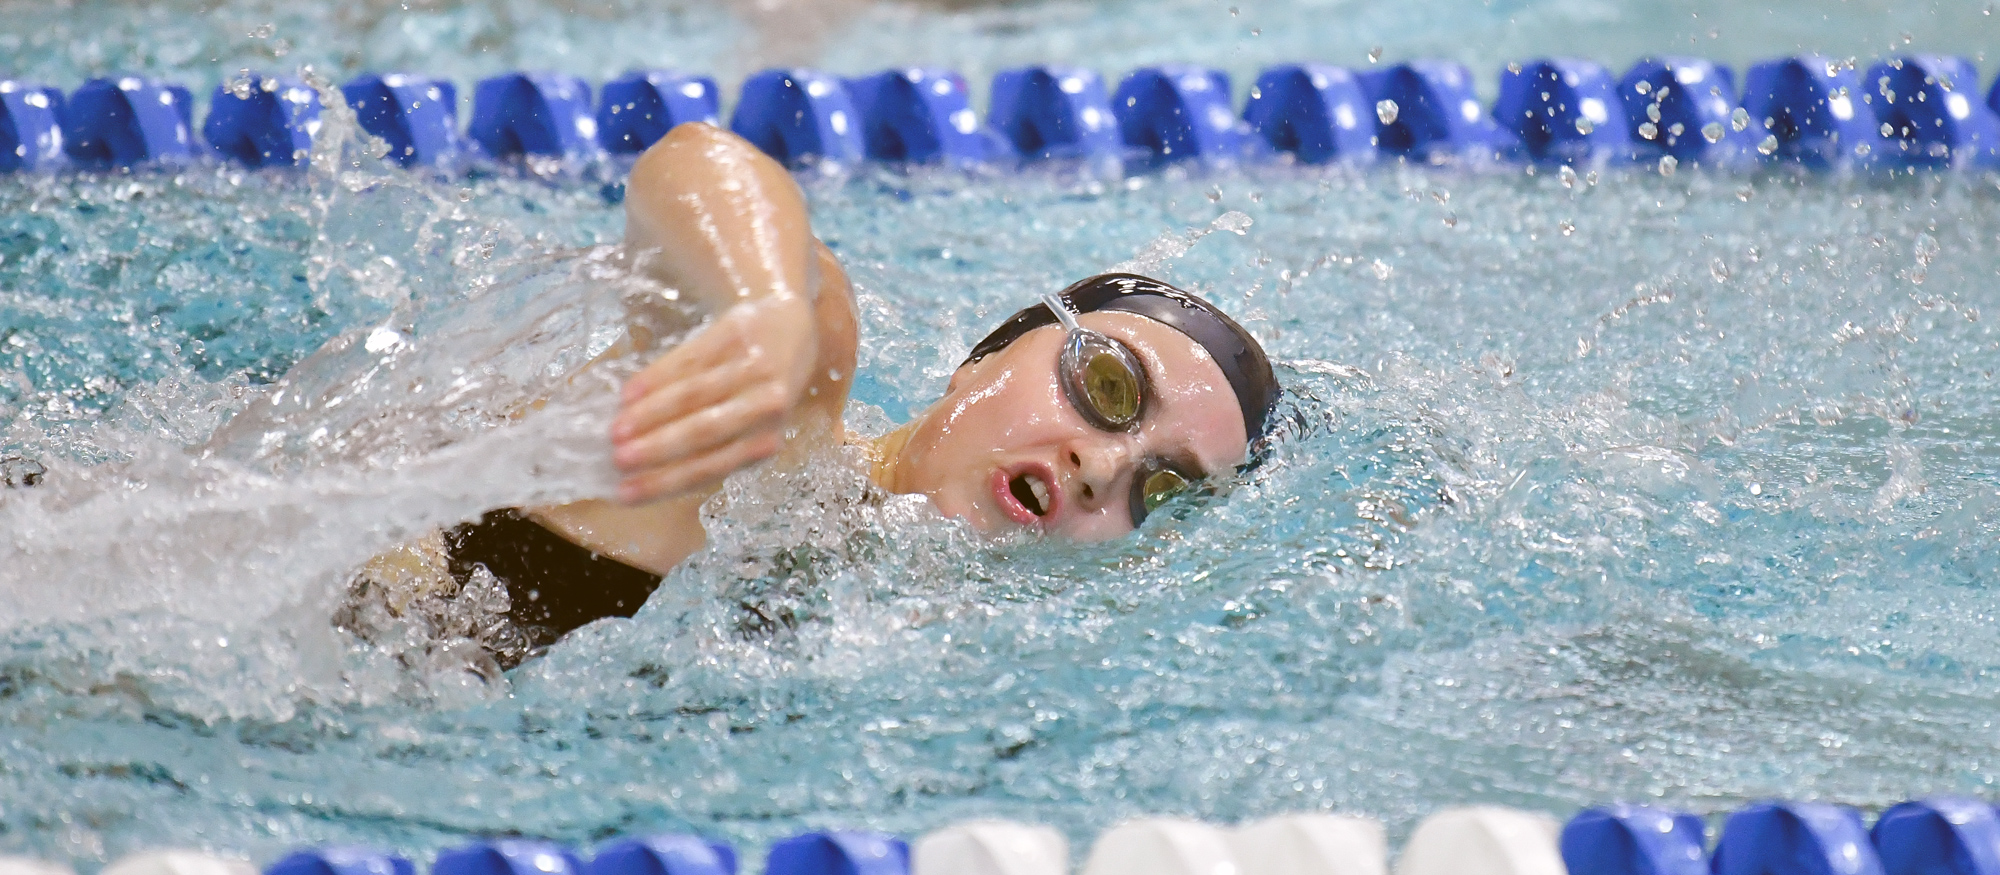 Eliza Williams scored points in the 400 IM, the 1,650 free, and the 200 fly at the RIT Invitational on Dec. 1-2, 2023. (RJB Sports file photo)